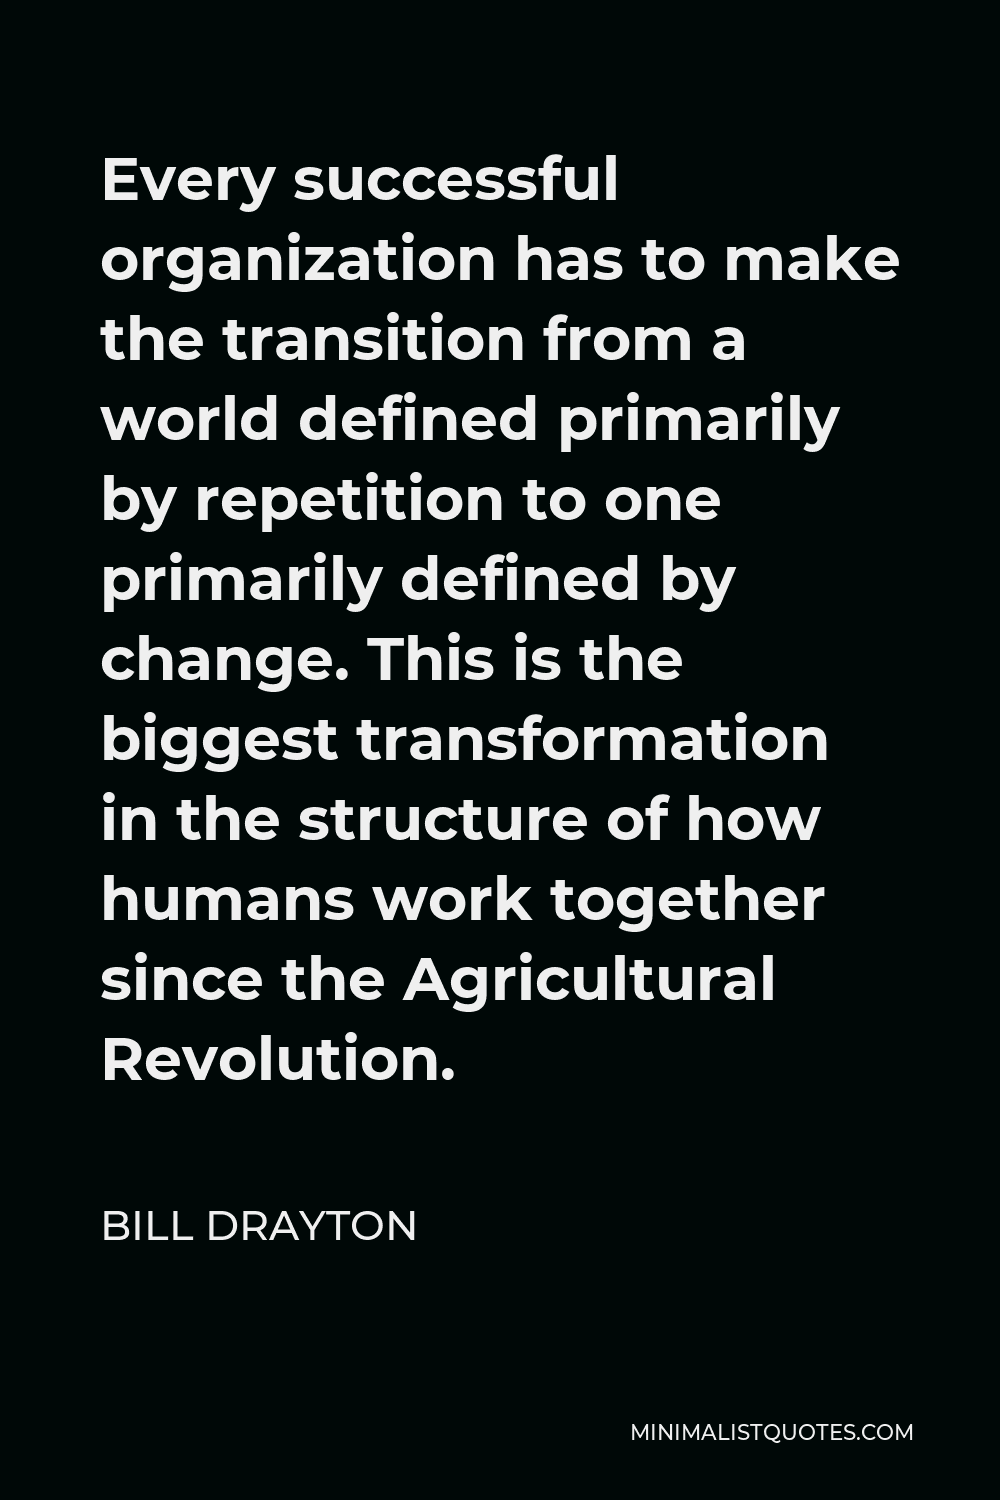 Bill Drayton Quote - Every successful organization has to make the transition from a world defined primarily by repetition to one primarily defined by change. This is the biggest transformation in the structure of how humans work together since the Agricultural Revolution.